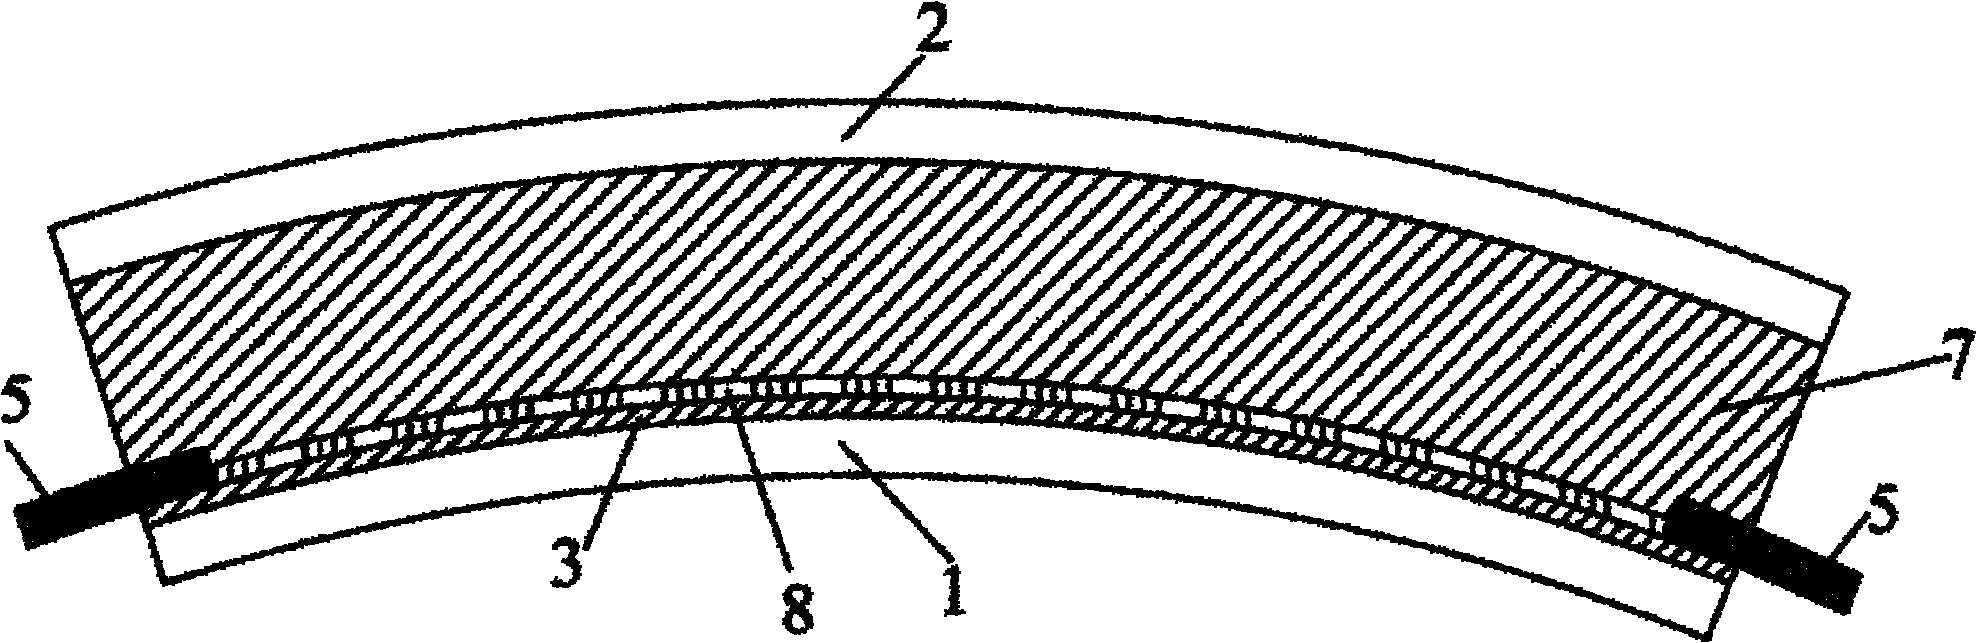 Compound functional sandwich glass containing metal nano-structured conductive layer